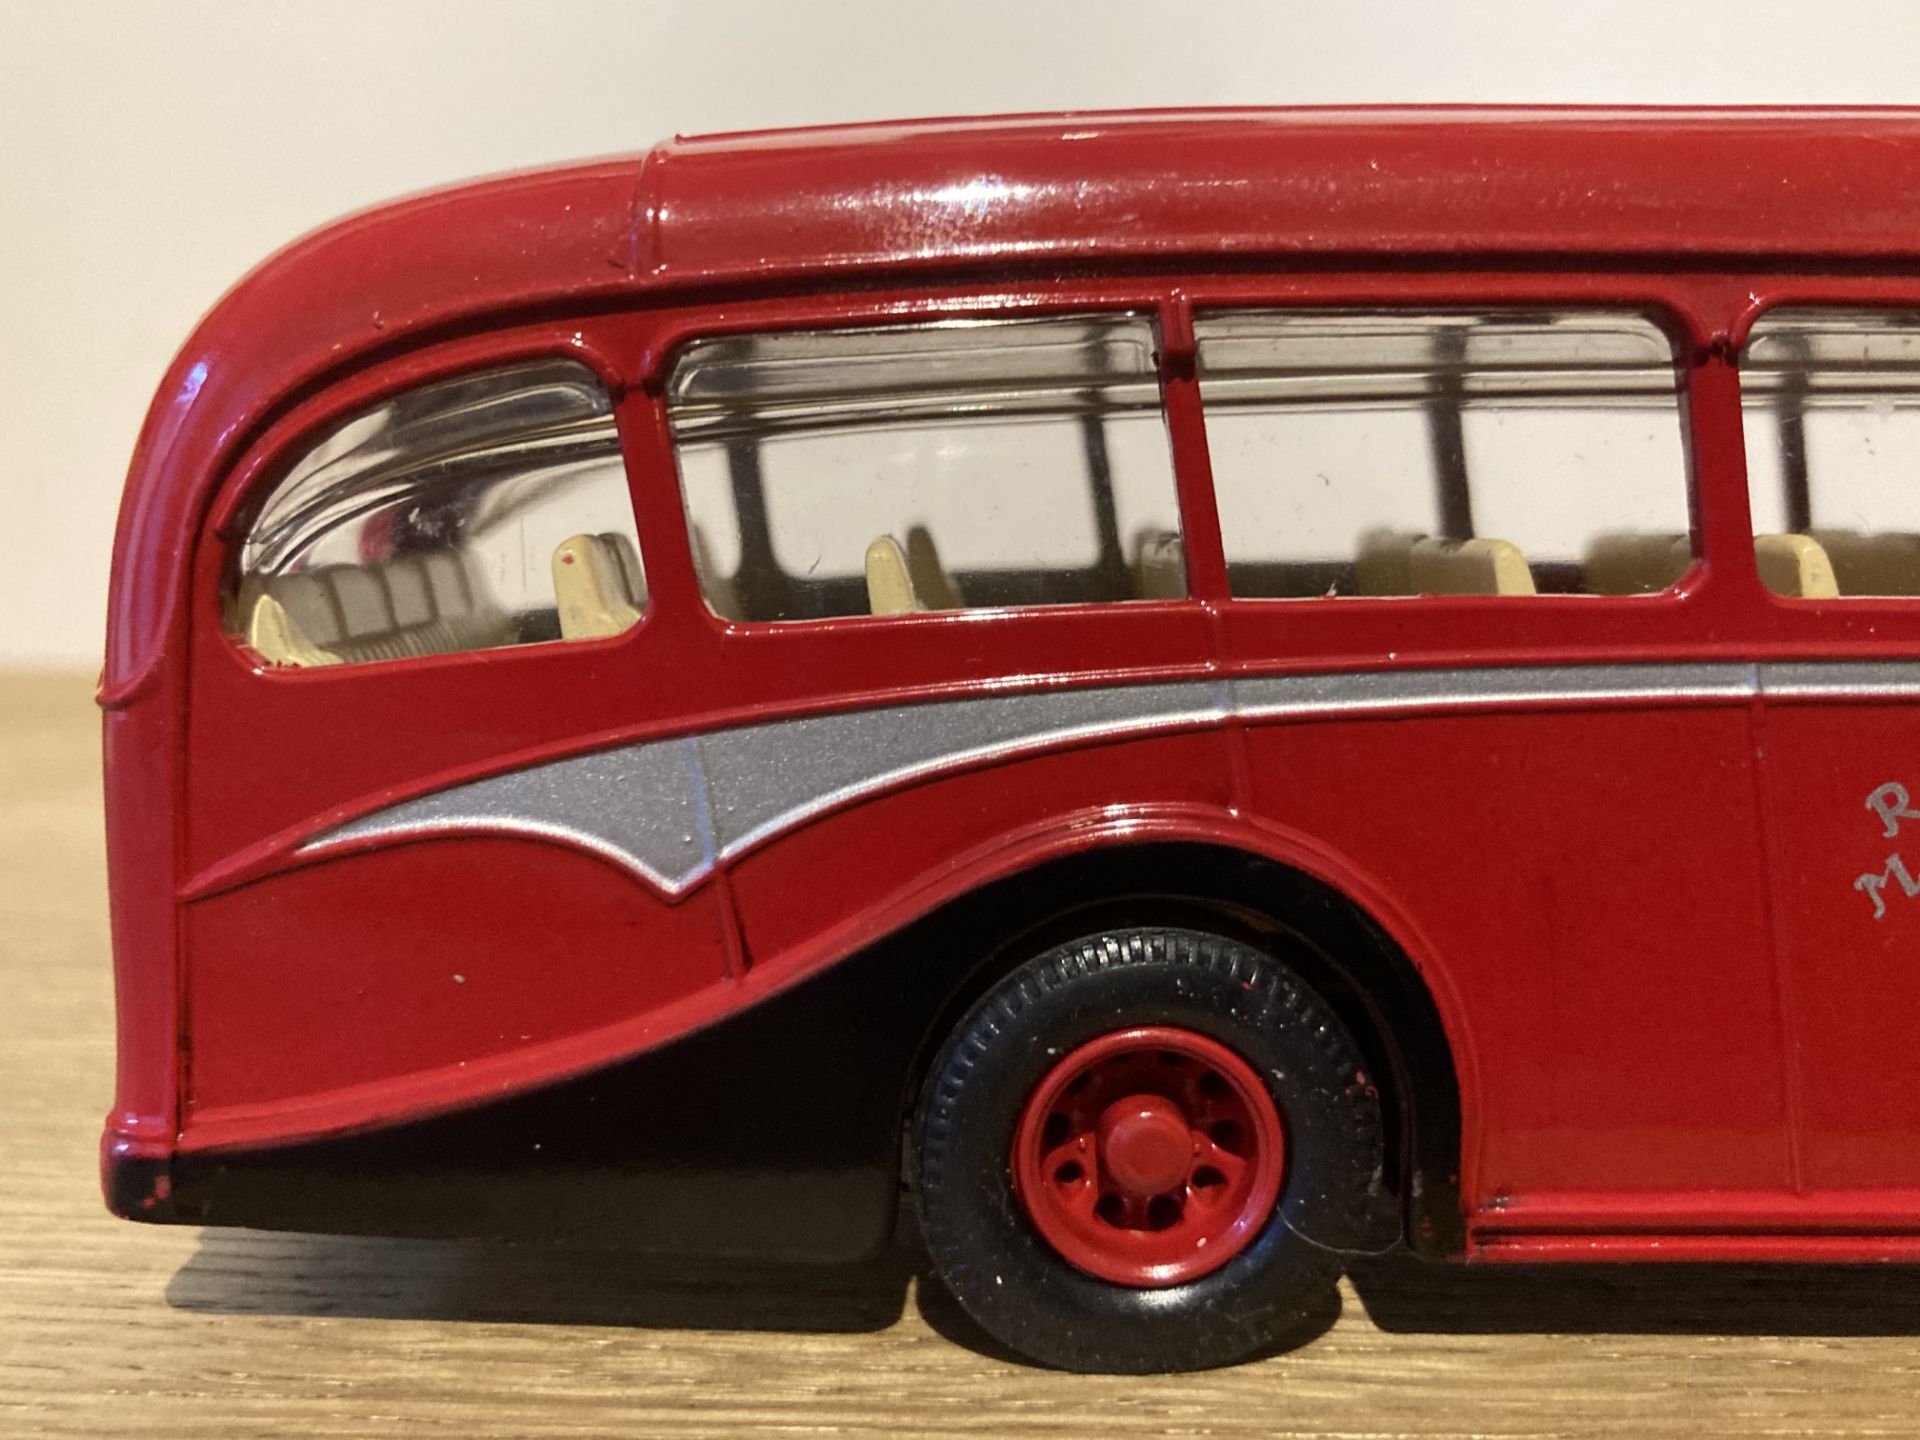 Limited Edition Corgi Rosslyn Motor Co, The AEC Regal - Image 8 of 13